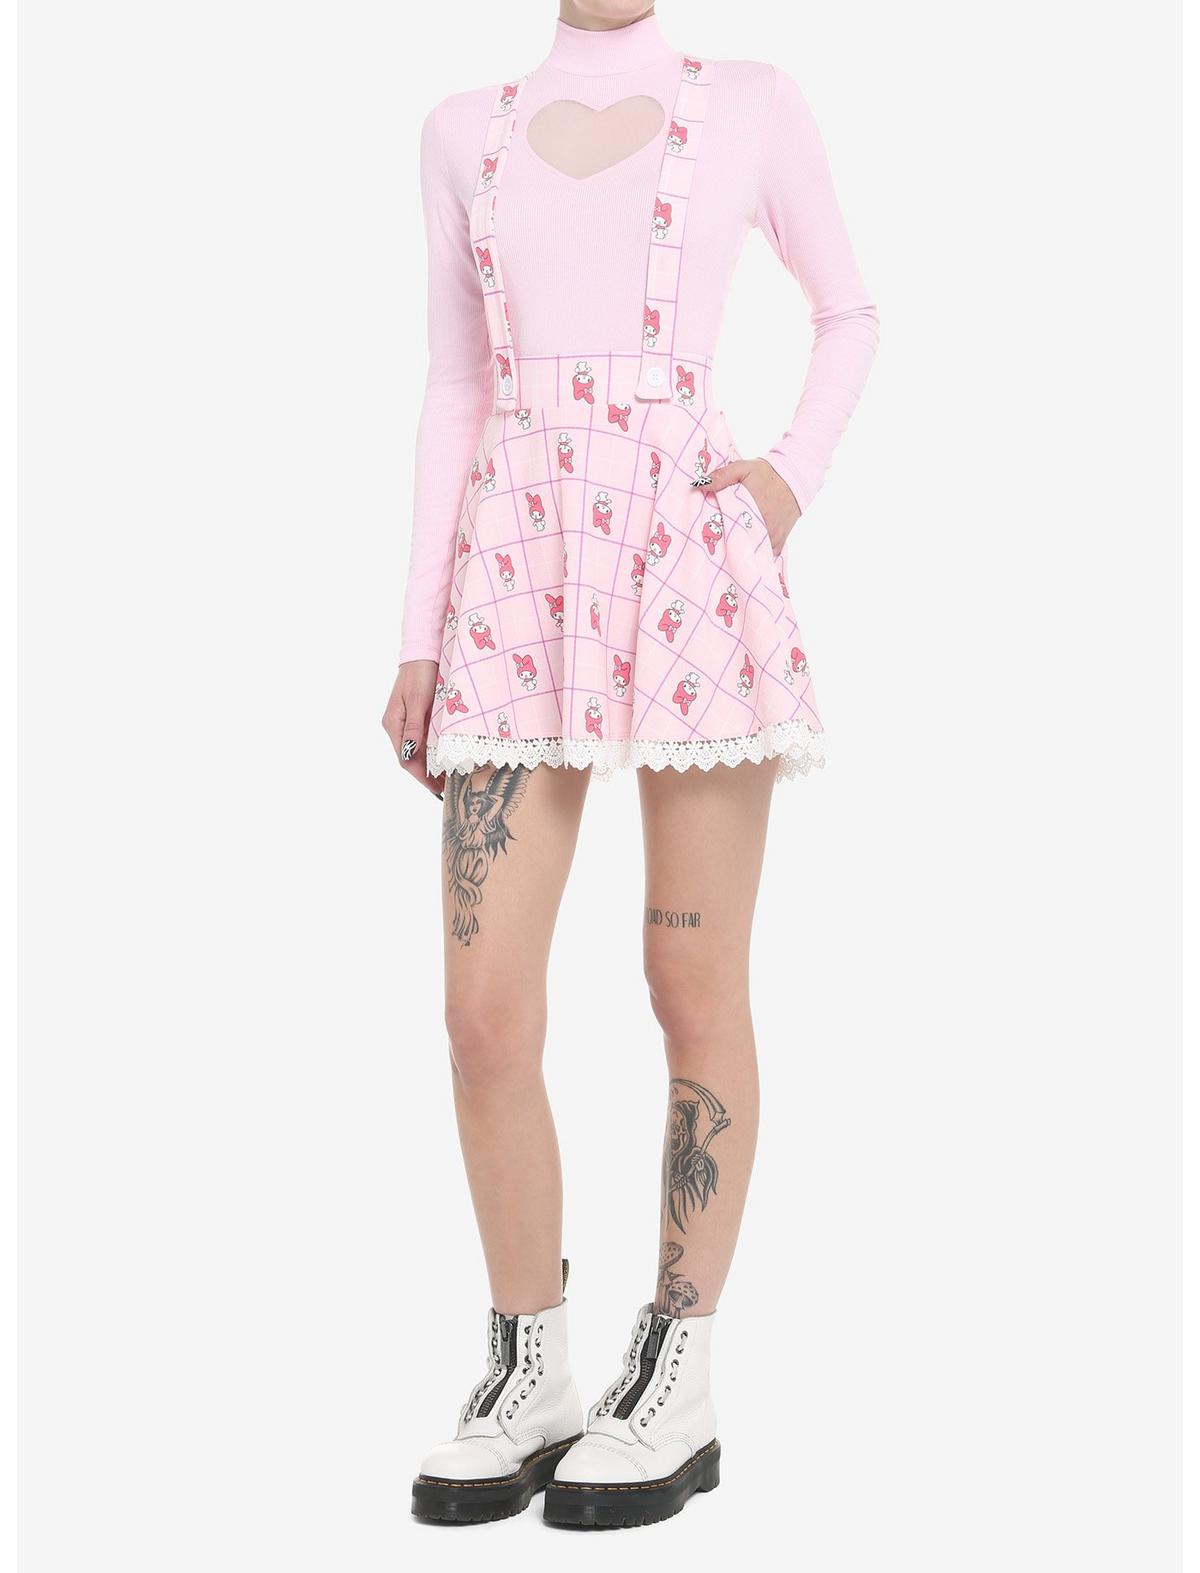 My Melody Plaid & Lace Suspender Skirt Multiple Sizes